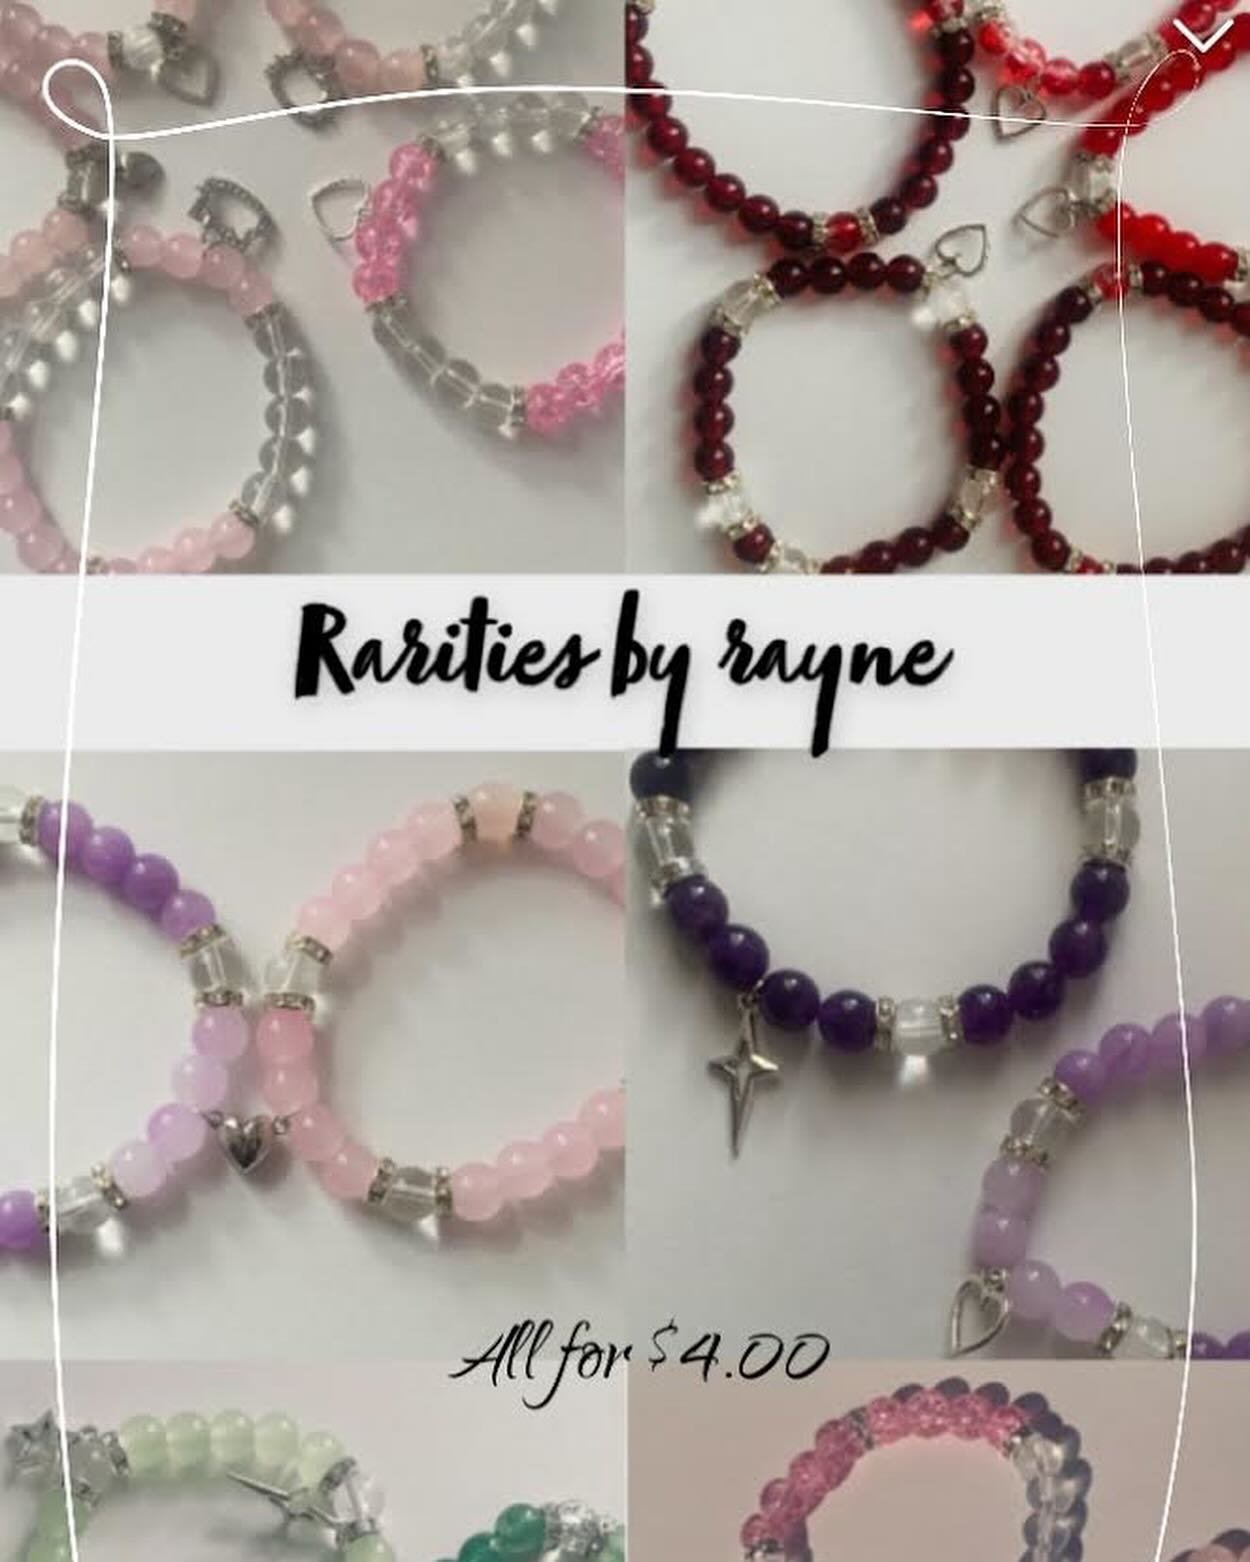 Come check out Rayne&rsquo;s booth at our holiday market THIS THURSDAY!
Earrings are $2, and bracelets are $4